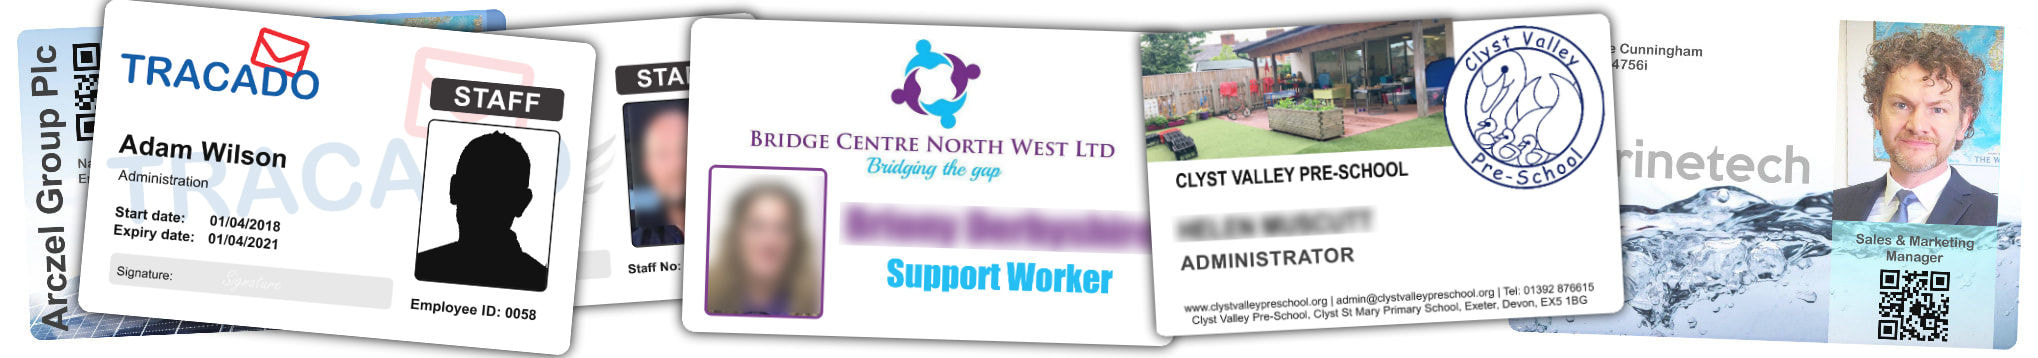 Peterborough examples of staff photo ID cards | samples of employee Identity card printing | Workers ID cards printed in 